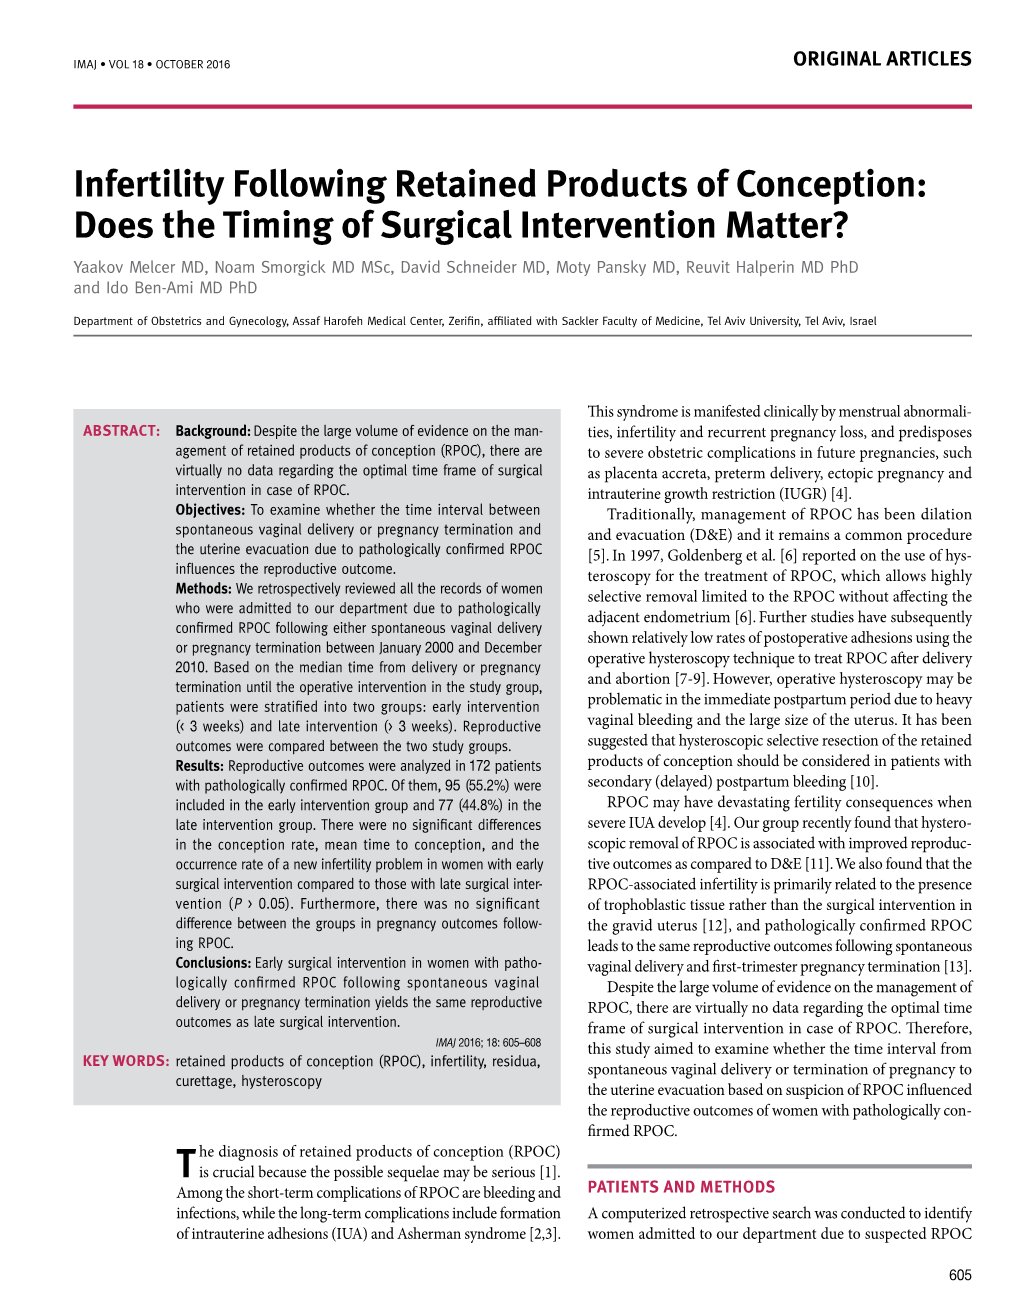 Infertility Following Retained Products of Conception: Does the Timing Of